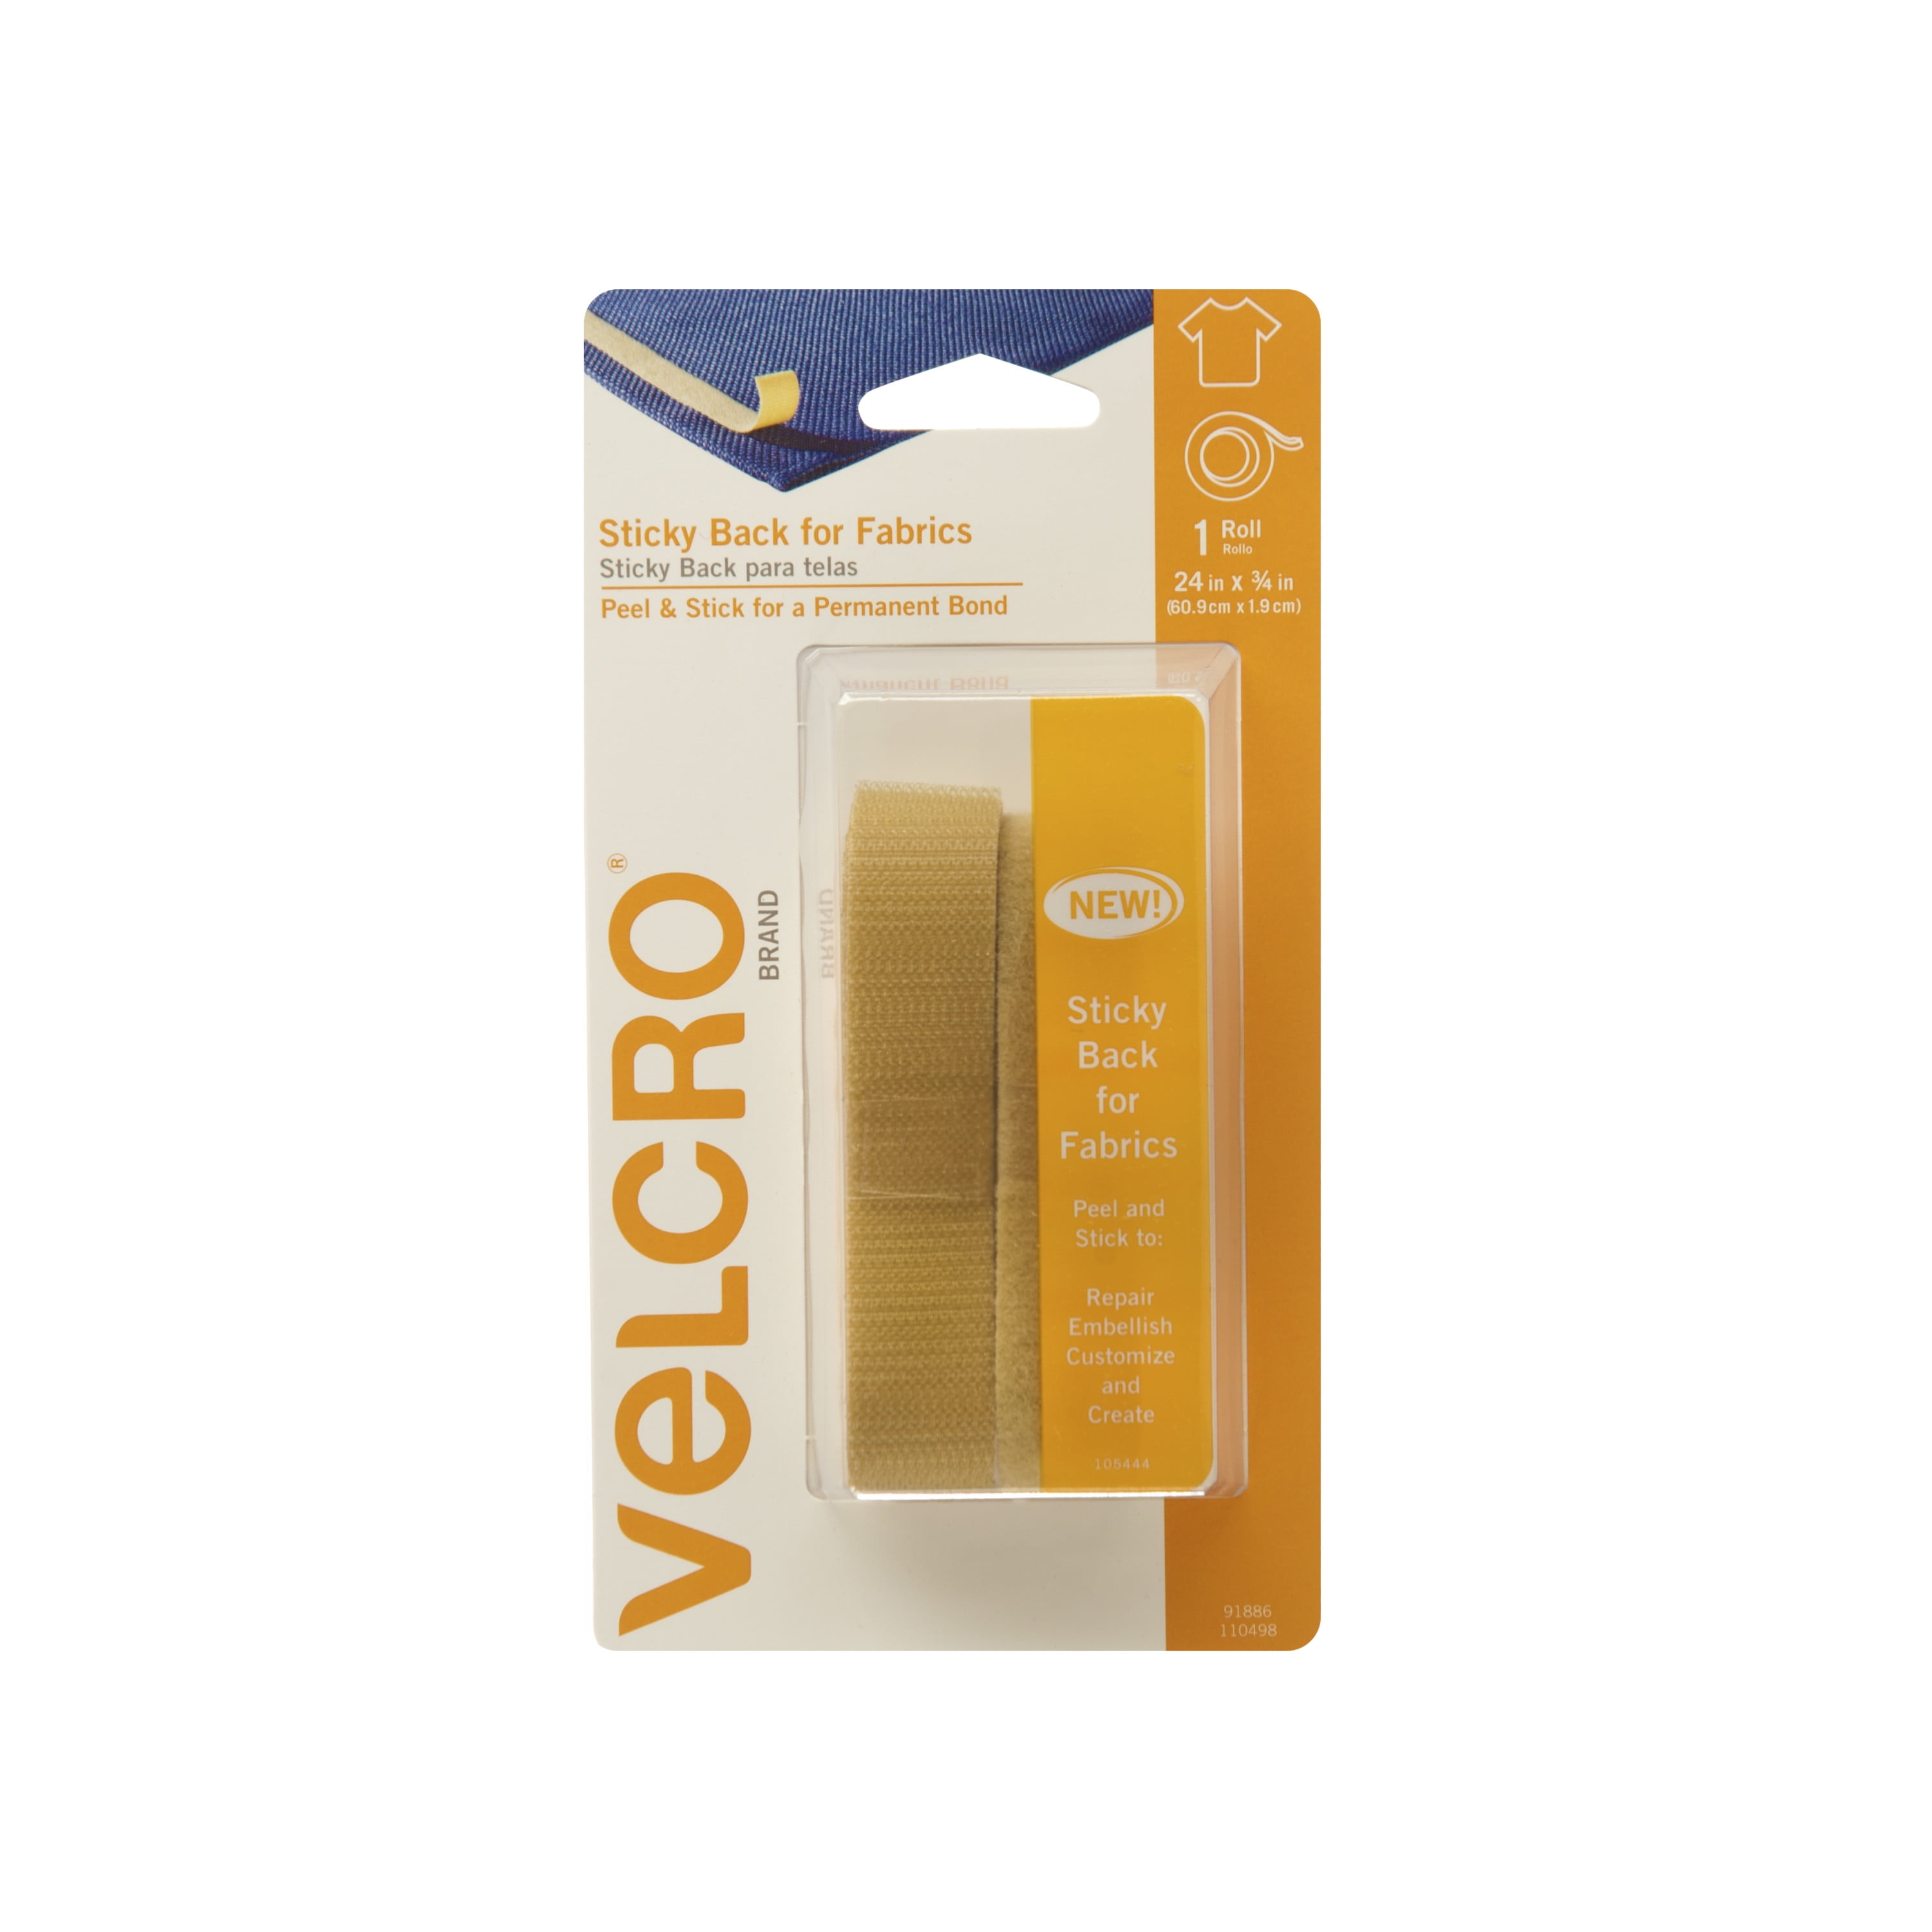 VELCRO Brand for Fabrics | Permanent Sticky Back Fabric Tape for Alterations and Hemming | Peel and Stick - No Sewing, Gluing, or Ironing | Cut-to-Length Roll, 24 in x 3/4 in, Beige